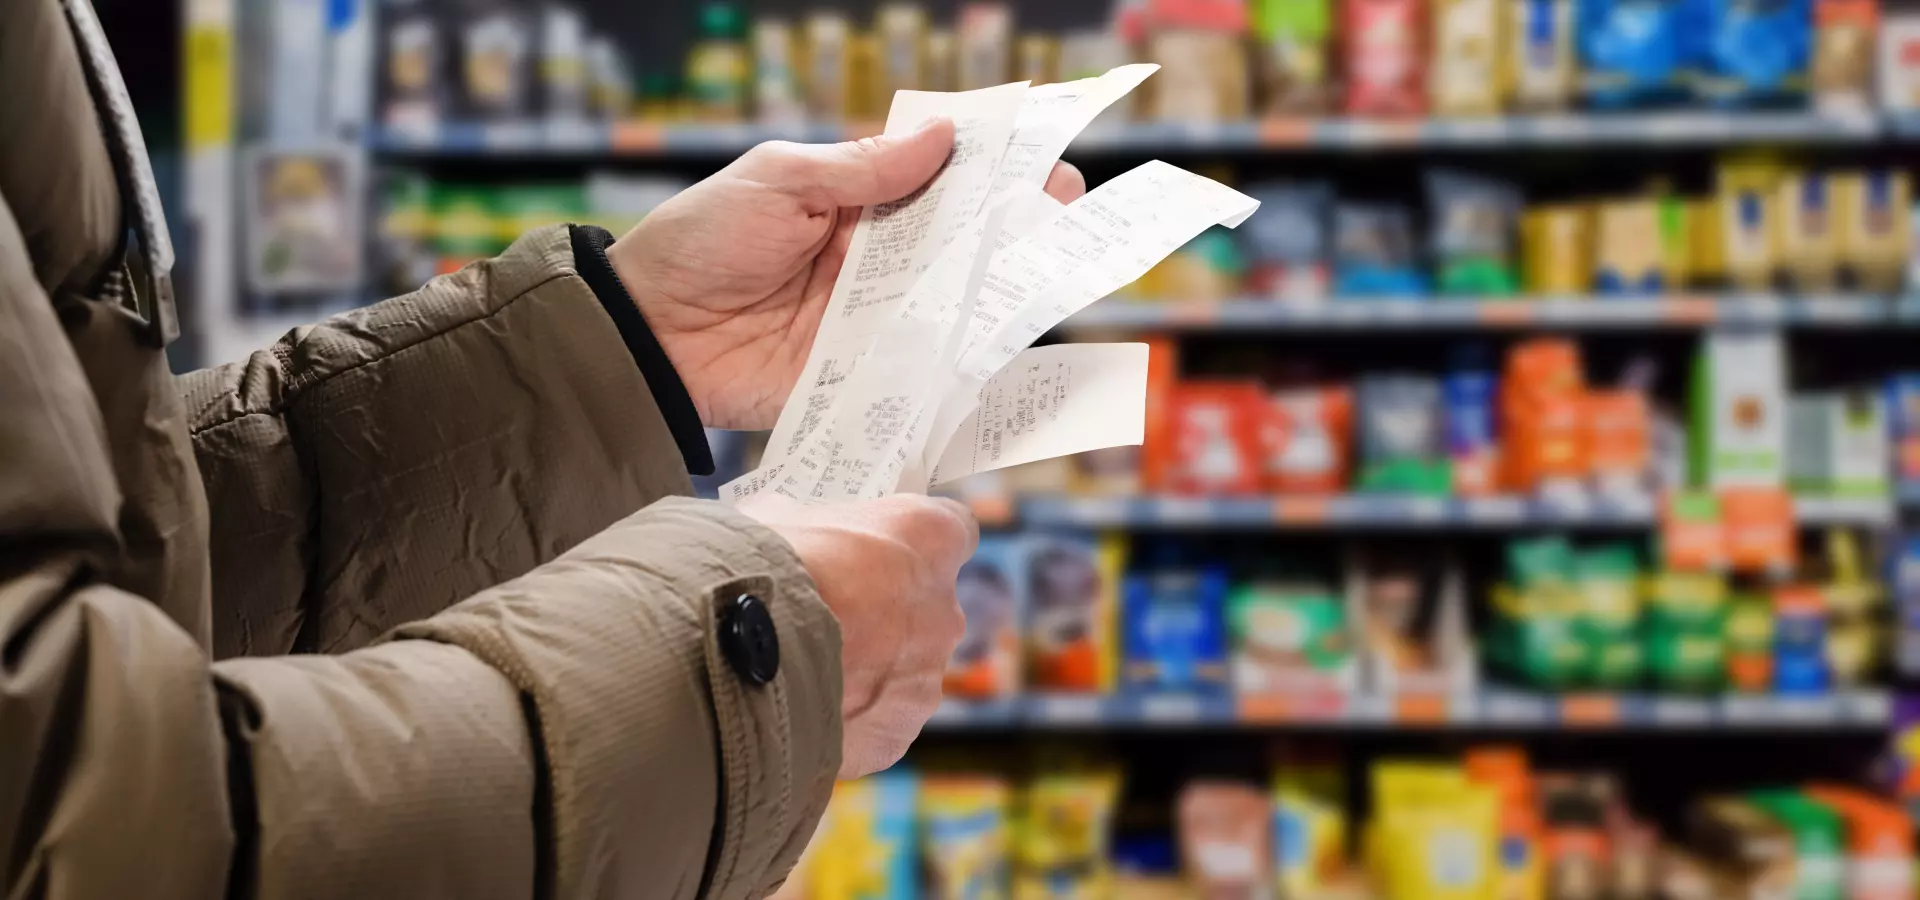 A person looking at their grocery receipt, with shop aisles in the background.